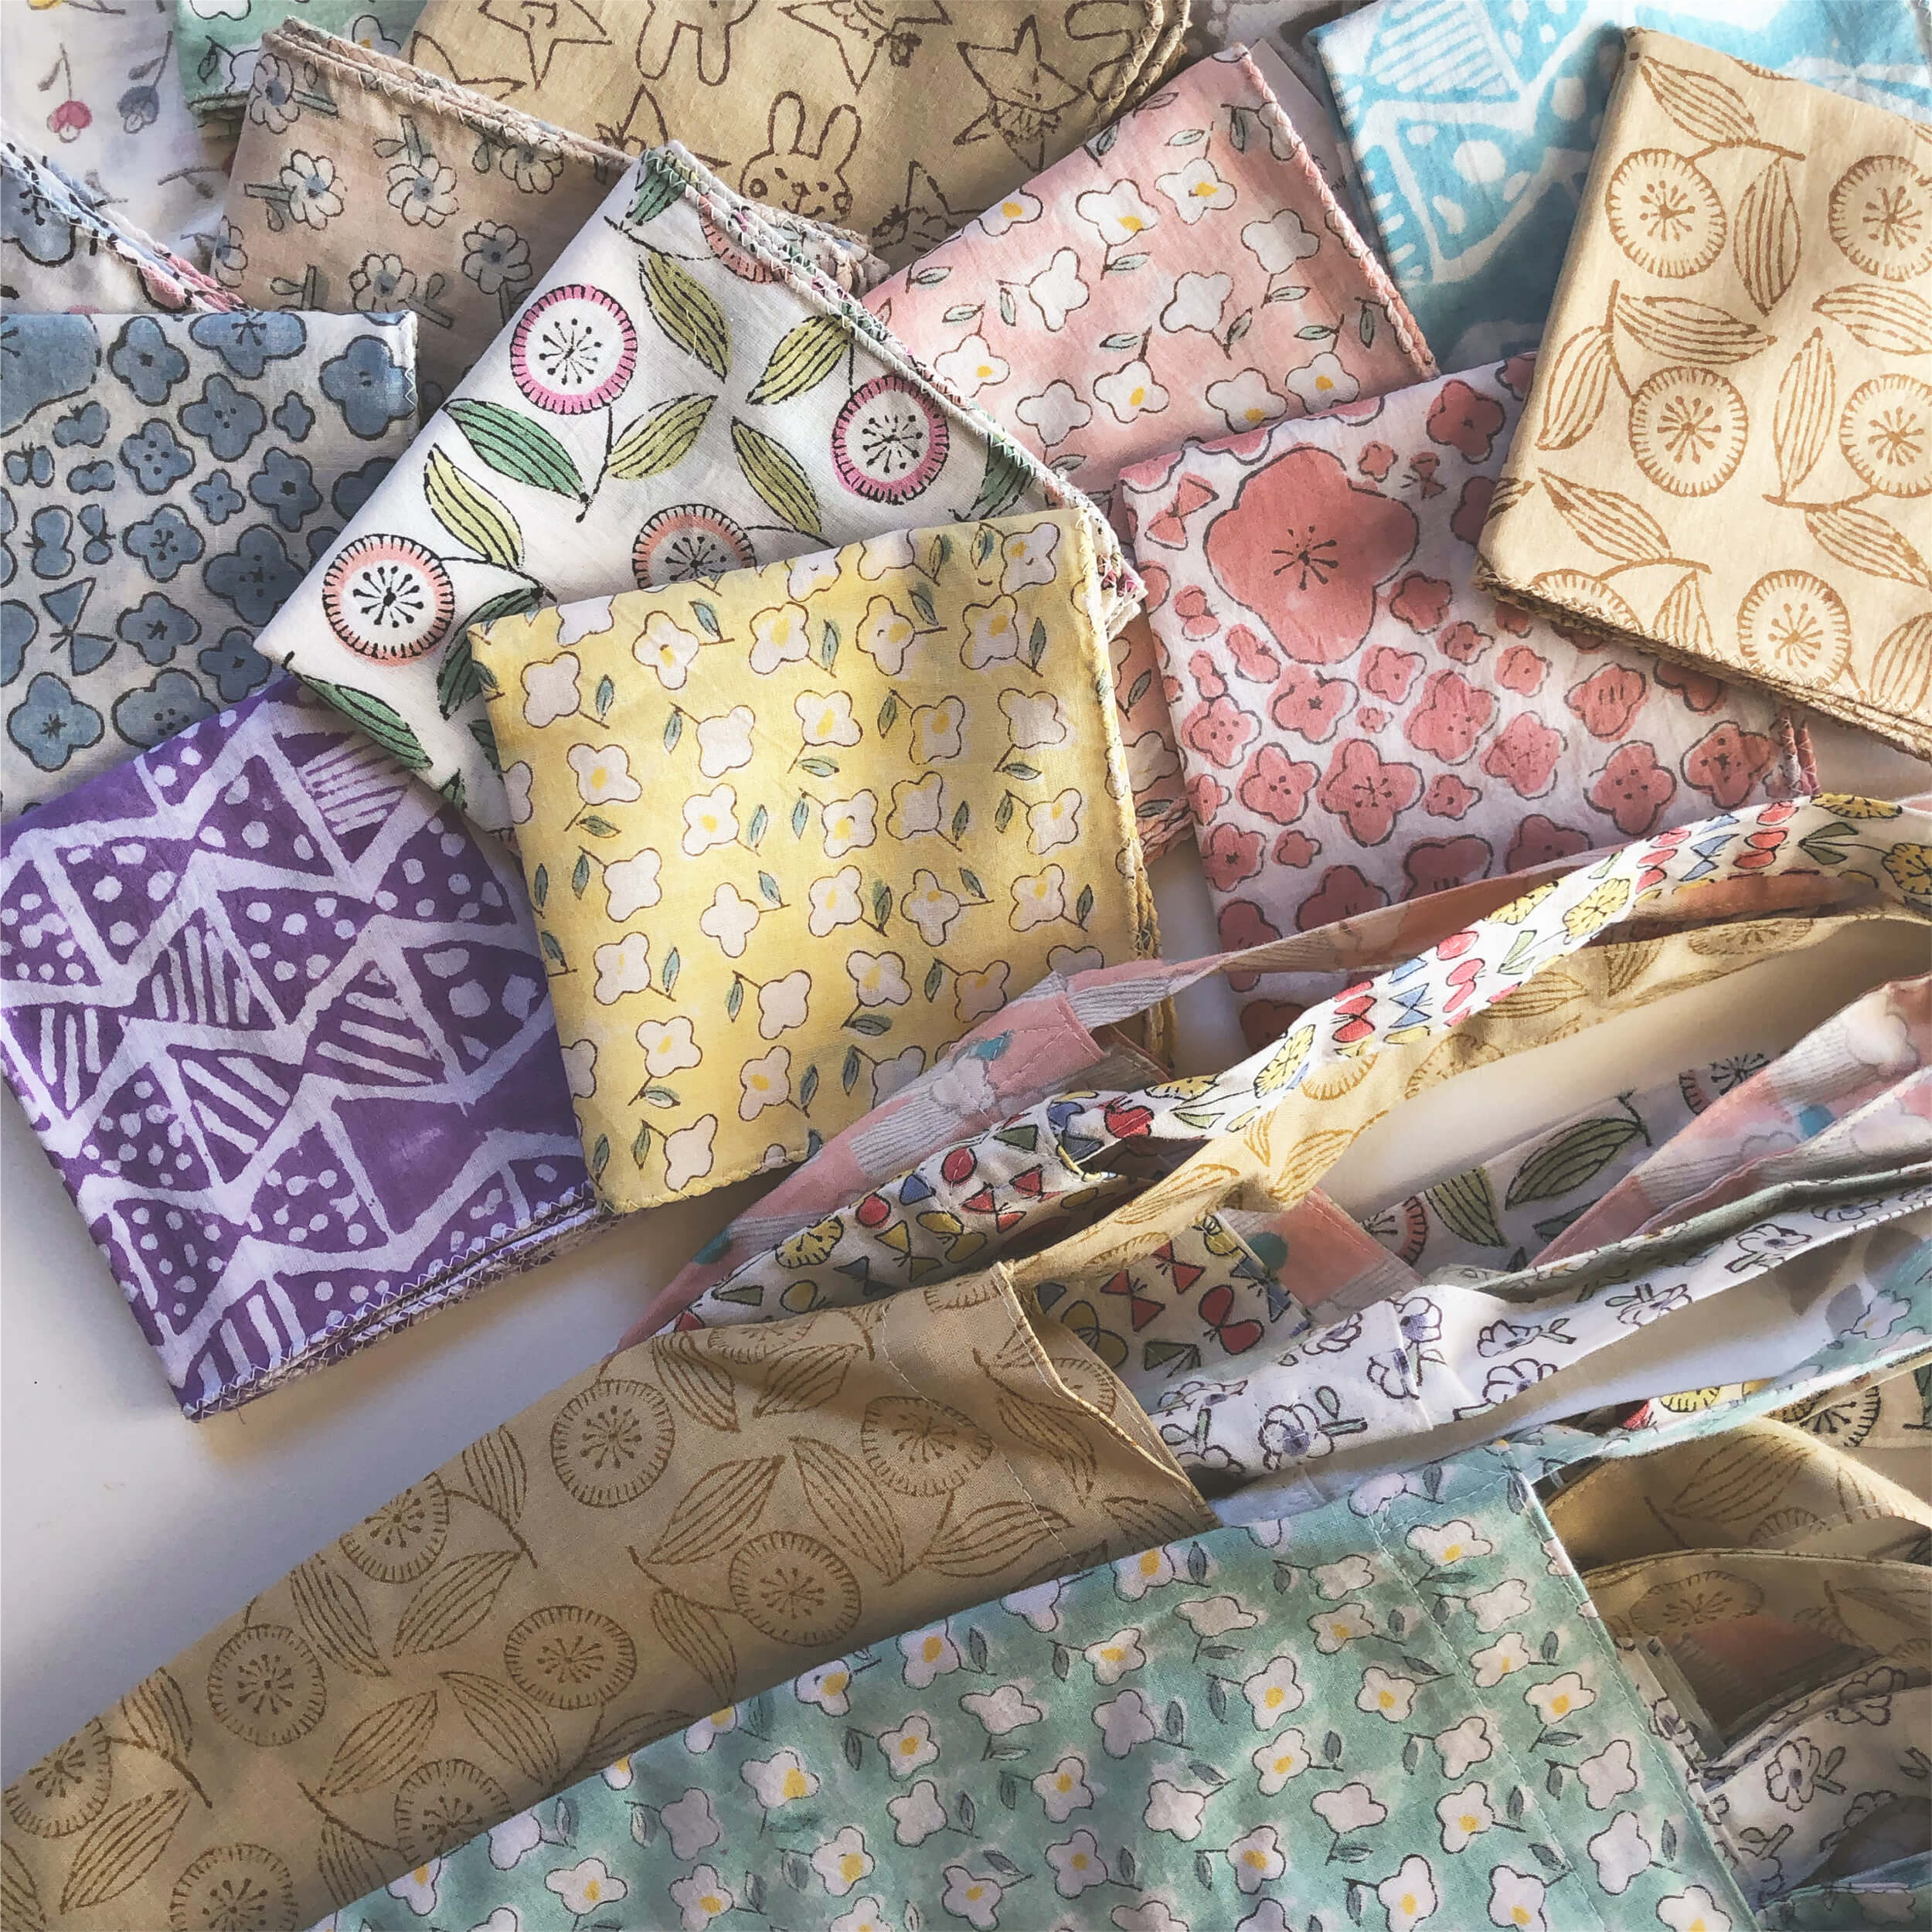 admi's colorful handkerchiefs and bags